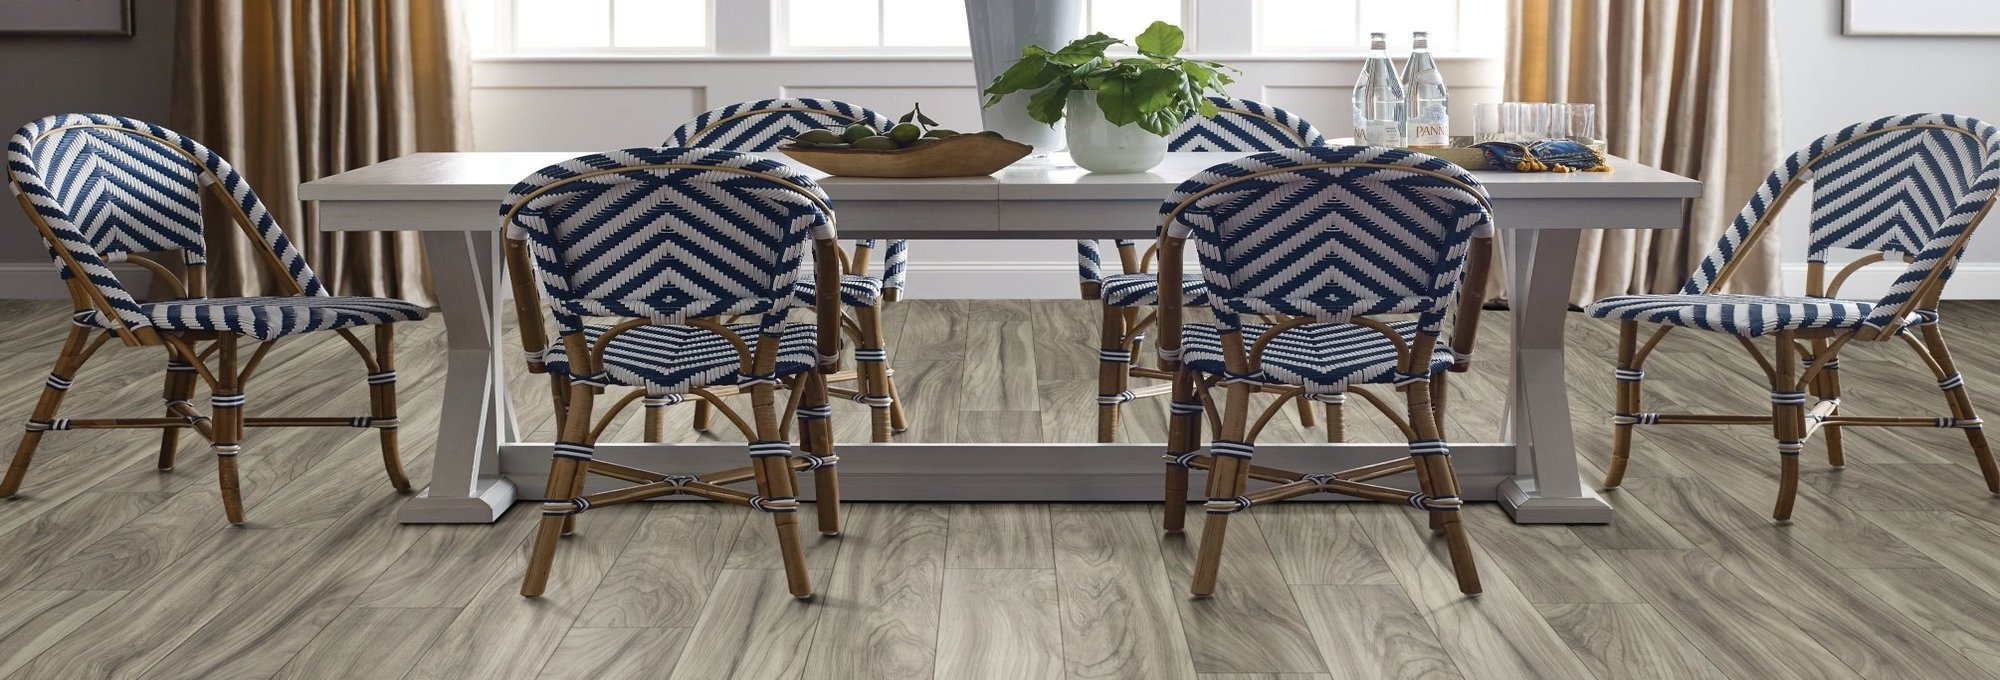 6 chairs to a table on laminate floor - craftsmancfc